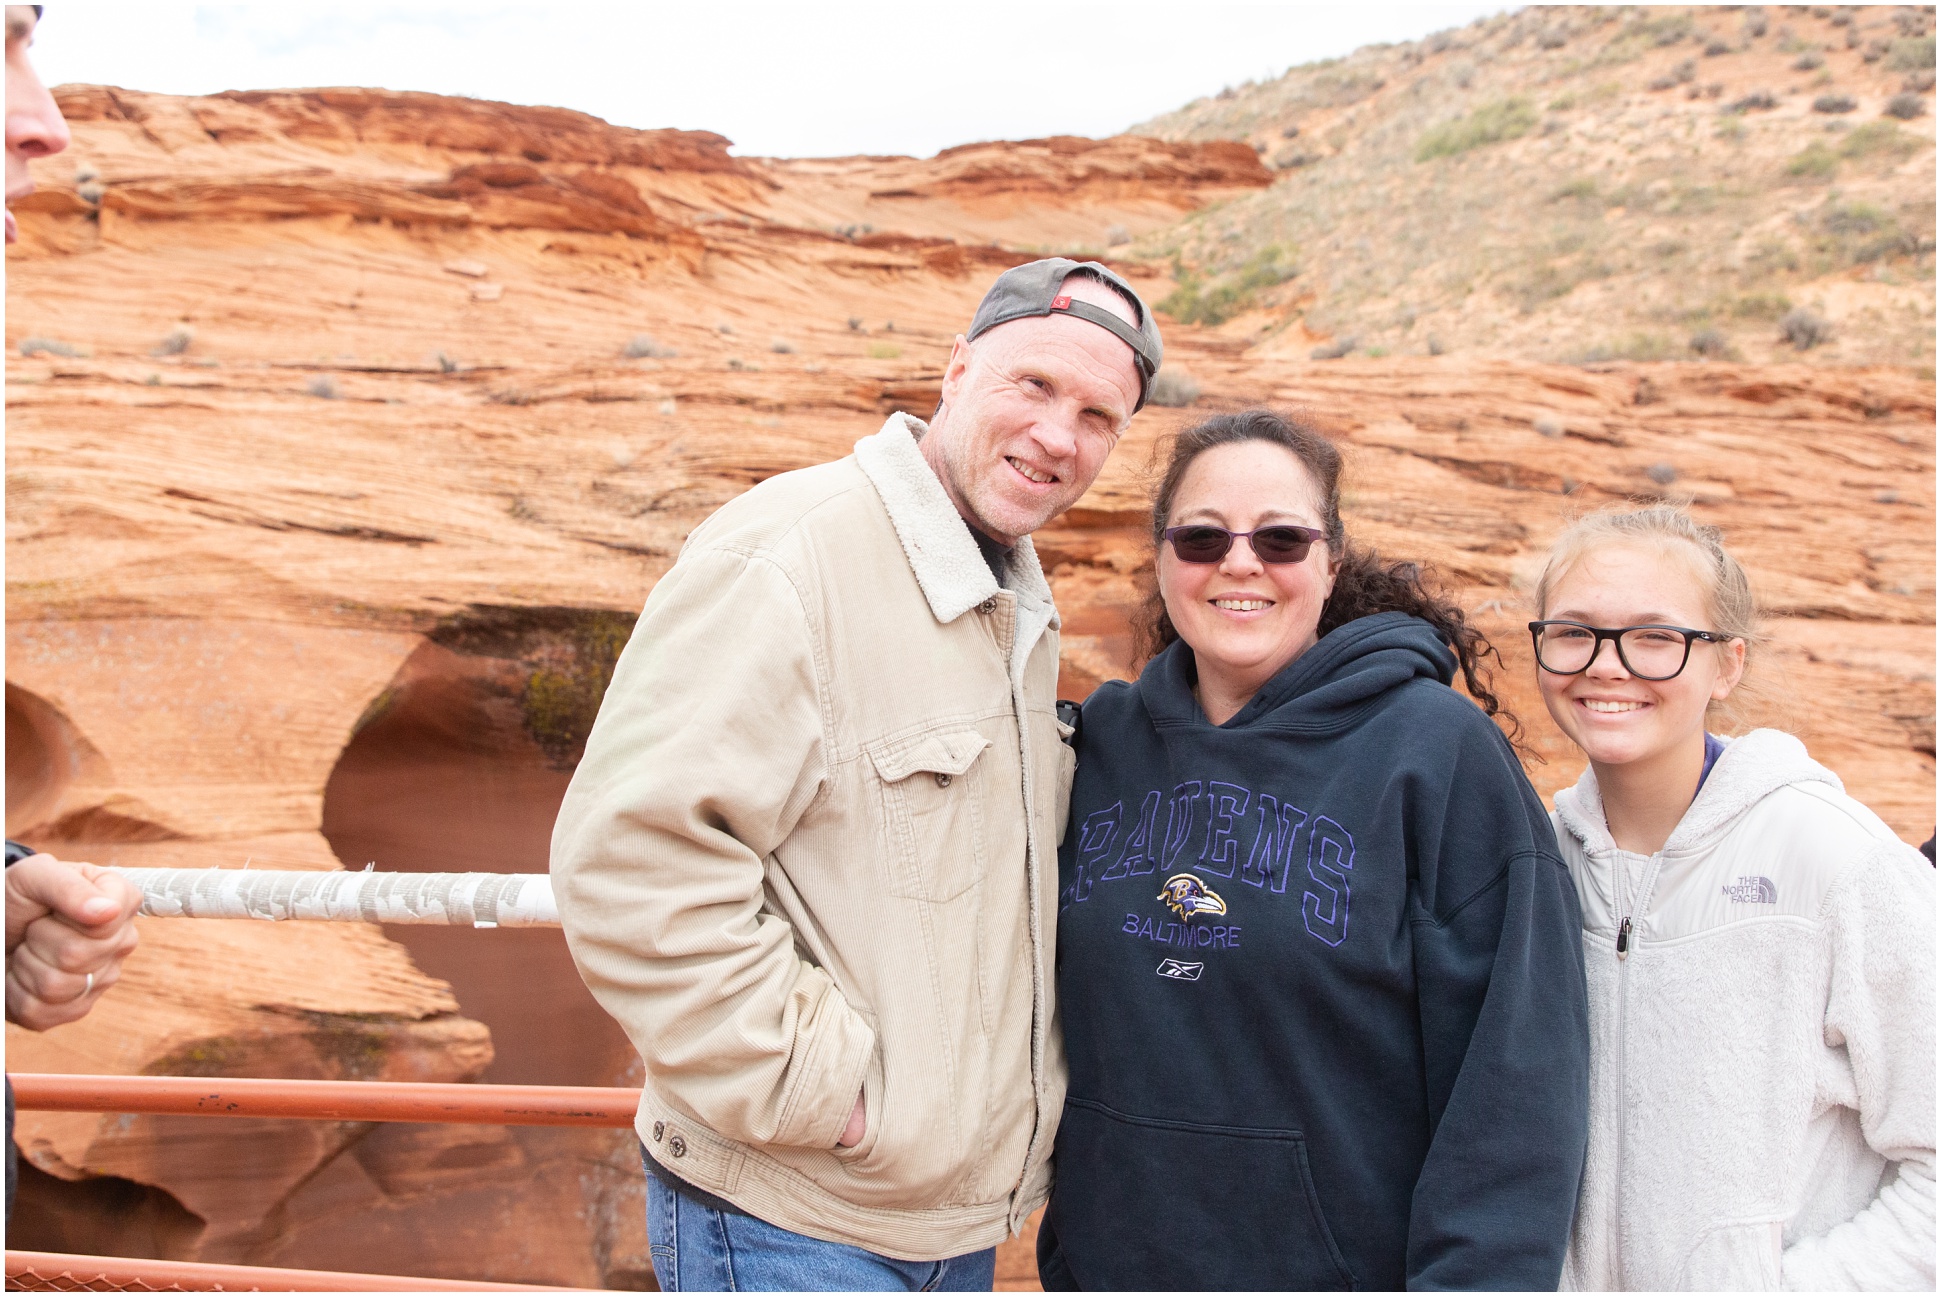 My parents, Charlie and Wendy, at the opening of Antelope Canyon